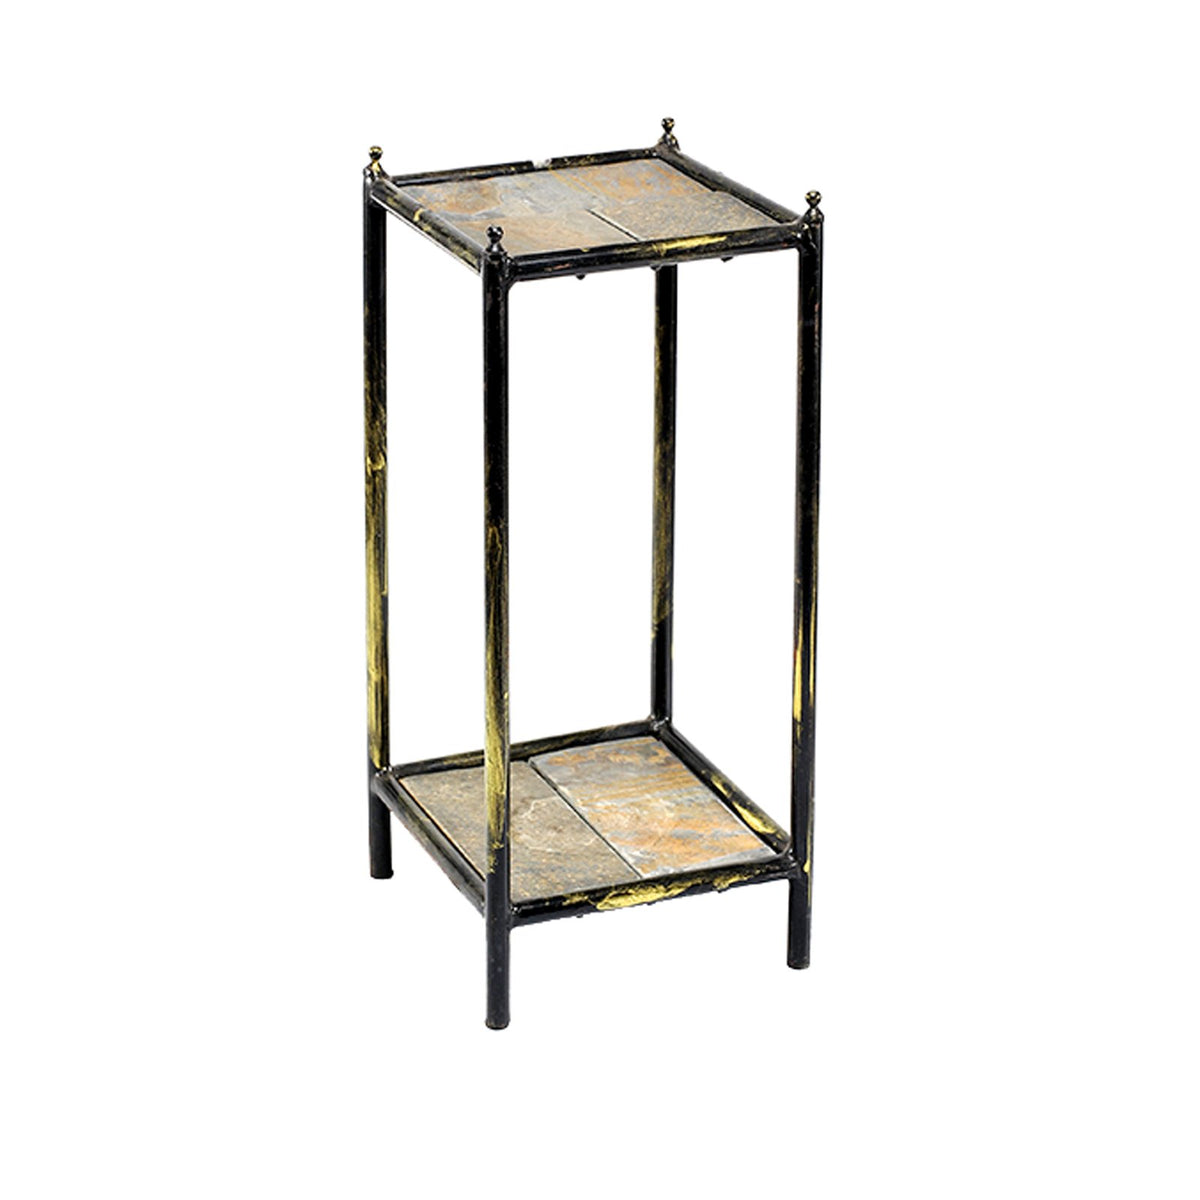 2 Tier Square Stone Top Plant Stand with Metal Frame, Small, Black and Gray - BM216732